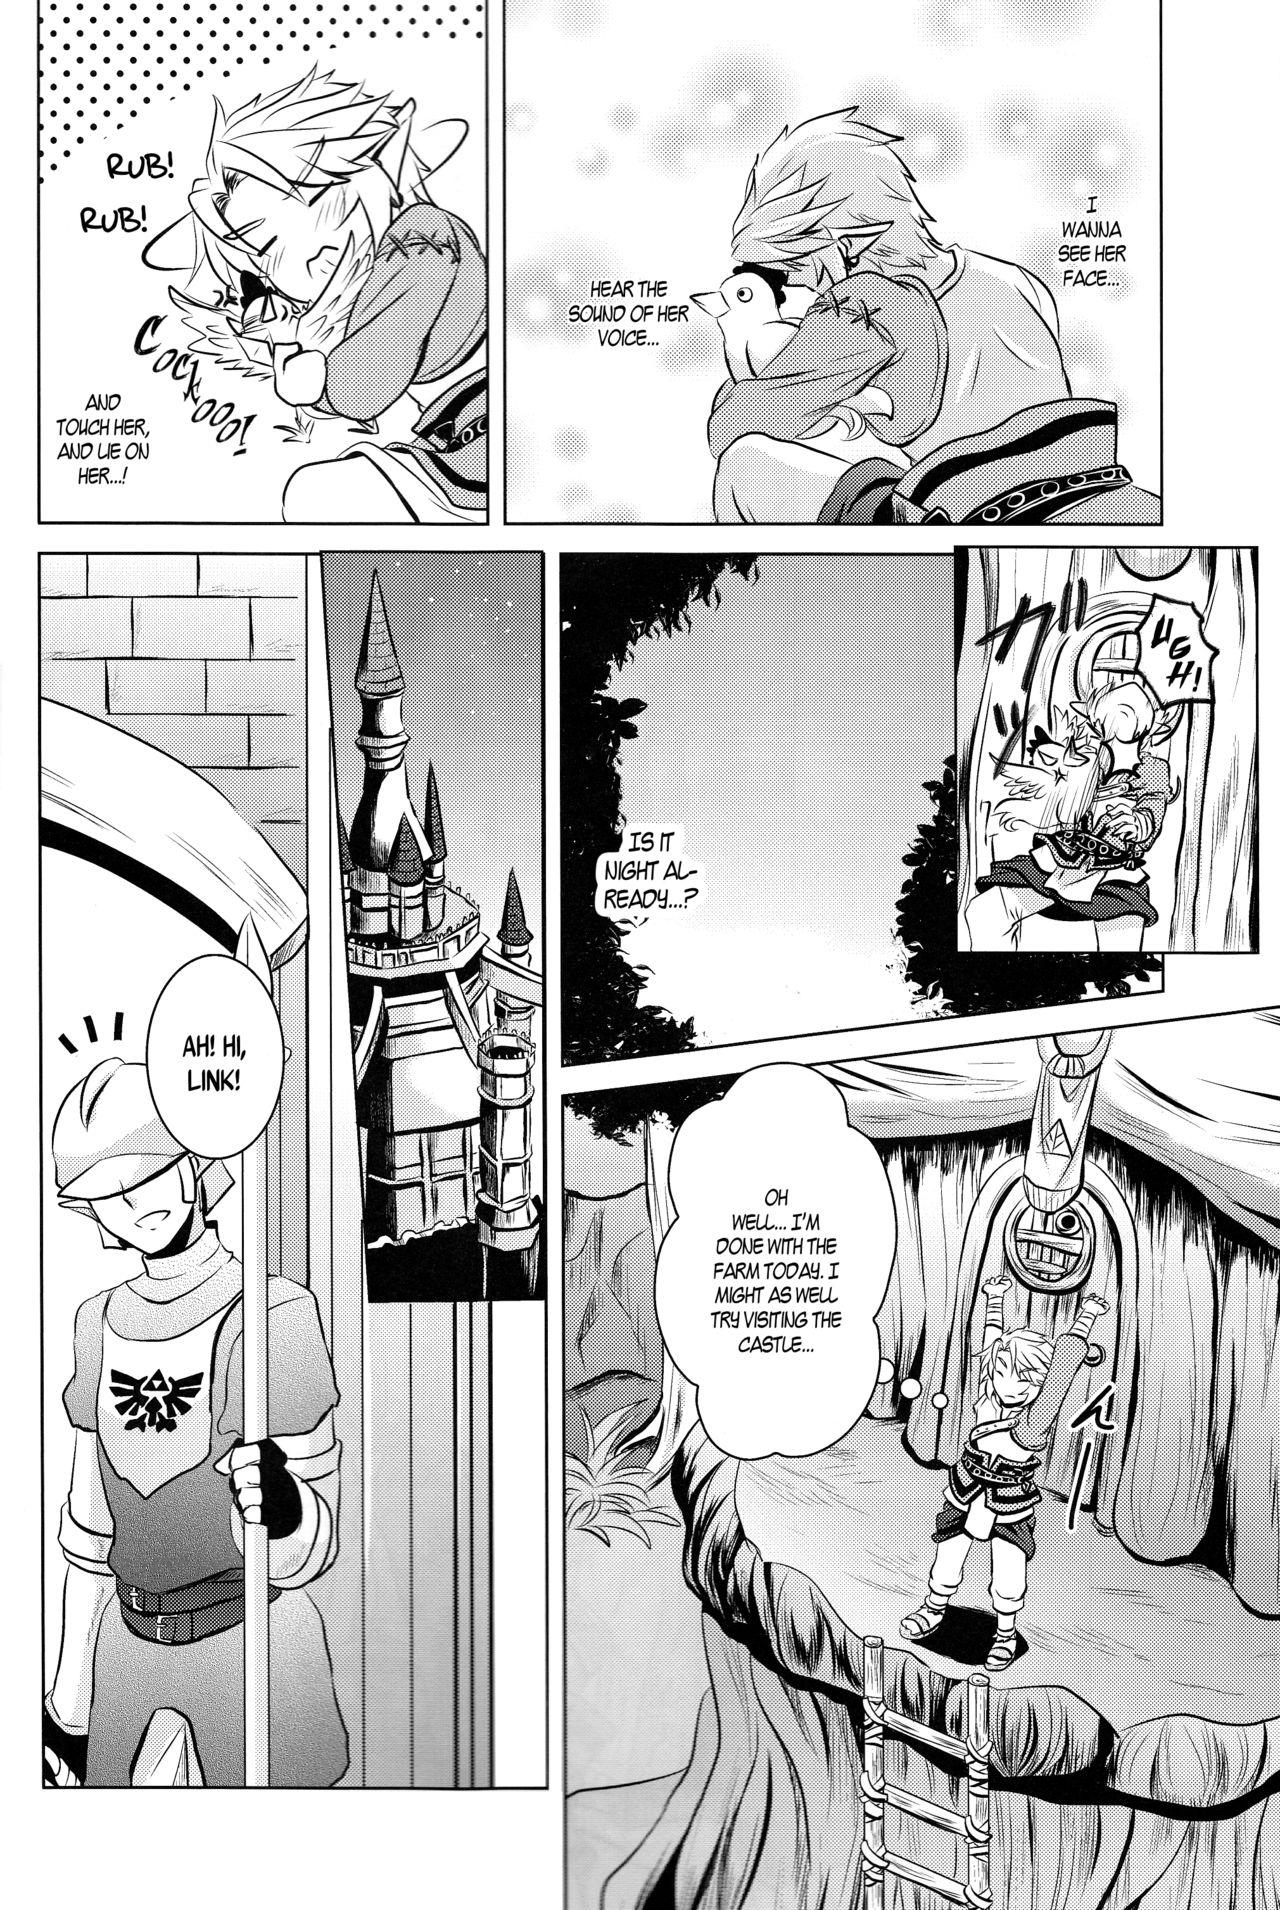 Sexo Anal Ameiro no Jikan | Amber Times - The legend of zelda Bedroom - Page 6